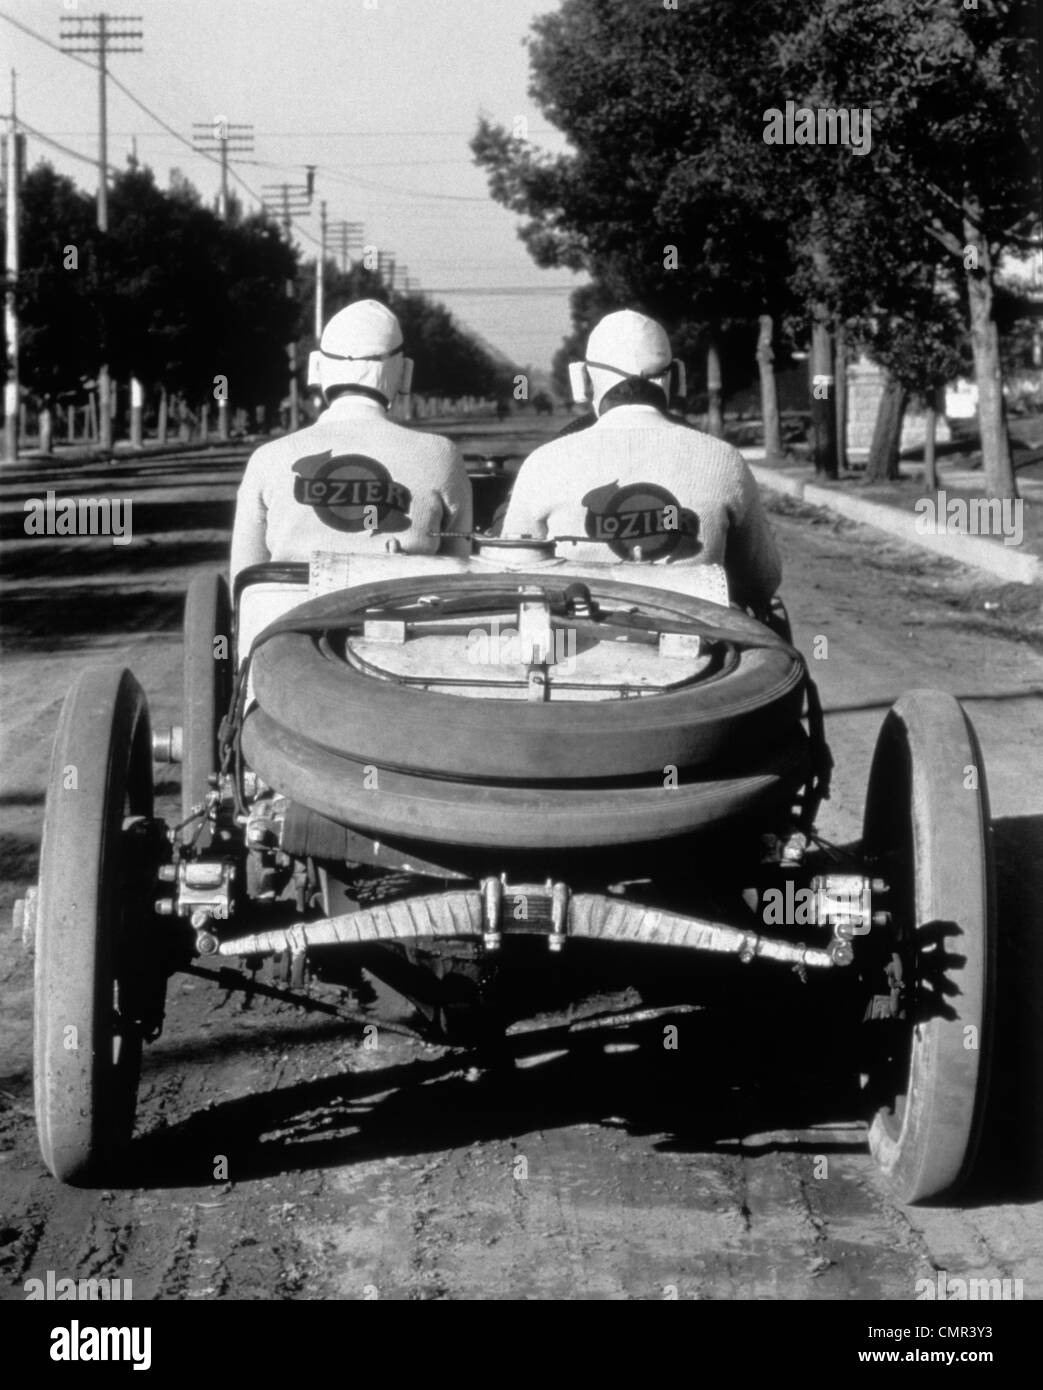 1900s 1910s REAR VIEW OF TWO MEN SITTING IN ANTIQUE LOZIER RACING ROAD RALLY CAR Stock Photo